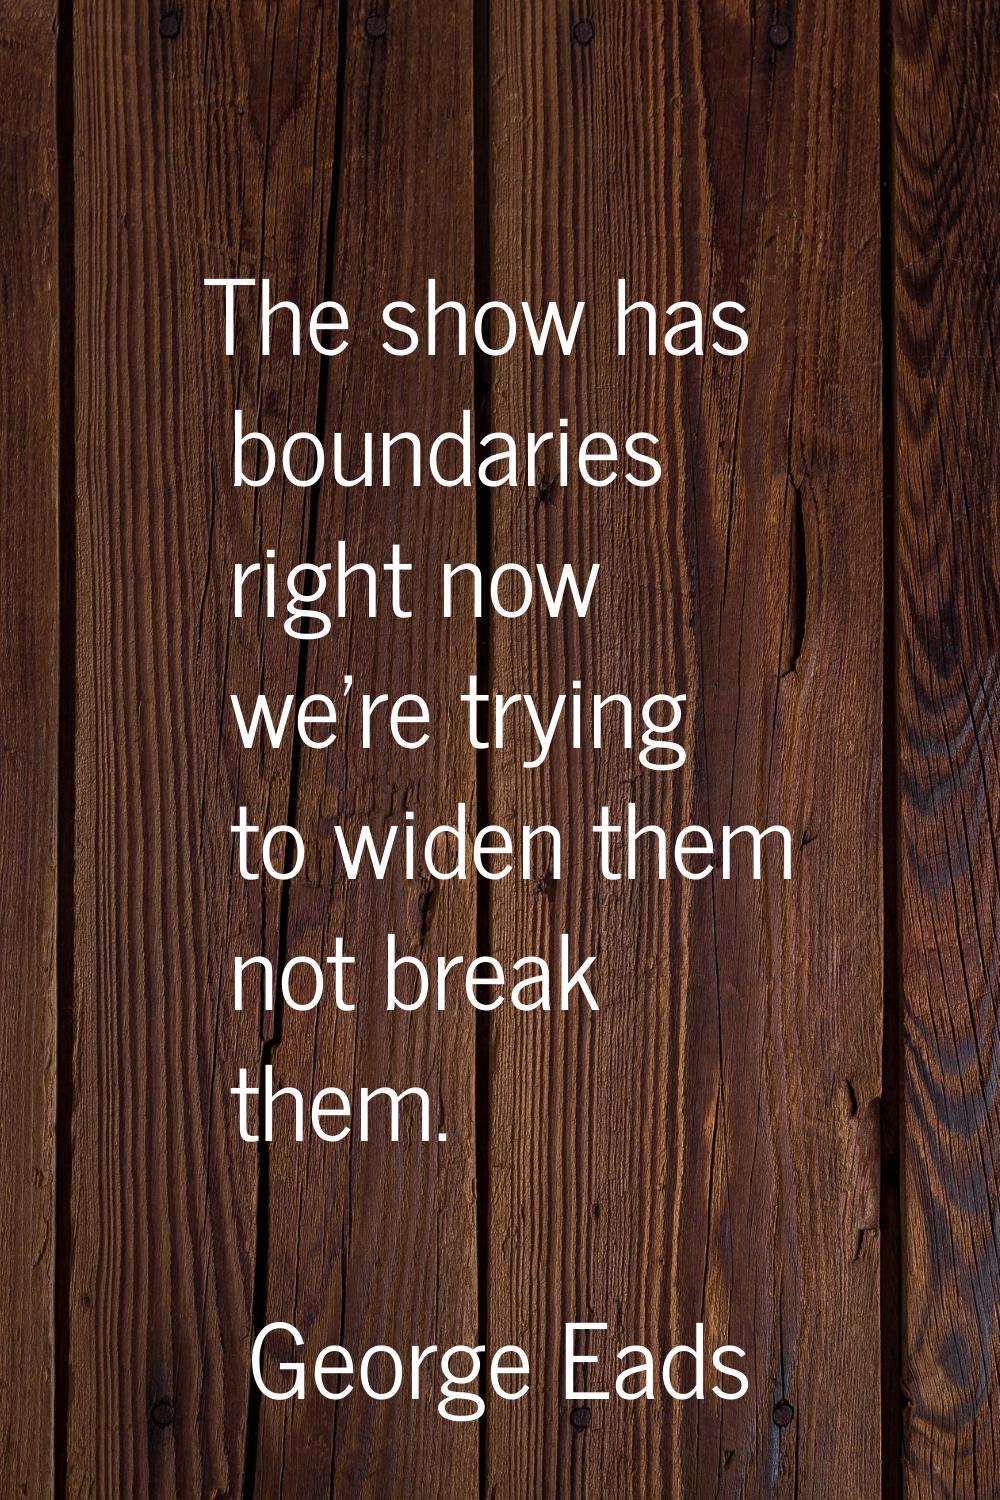 The show has boundaries right now we're trying to widen them not break them.